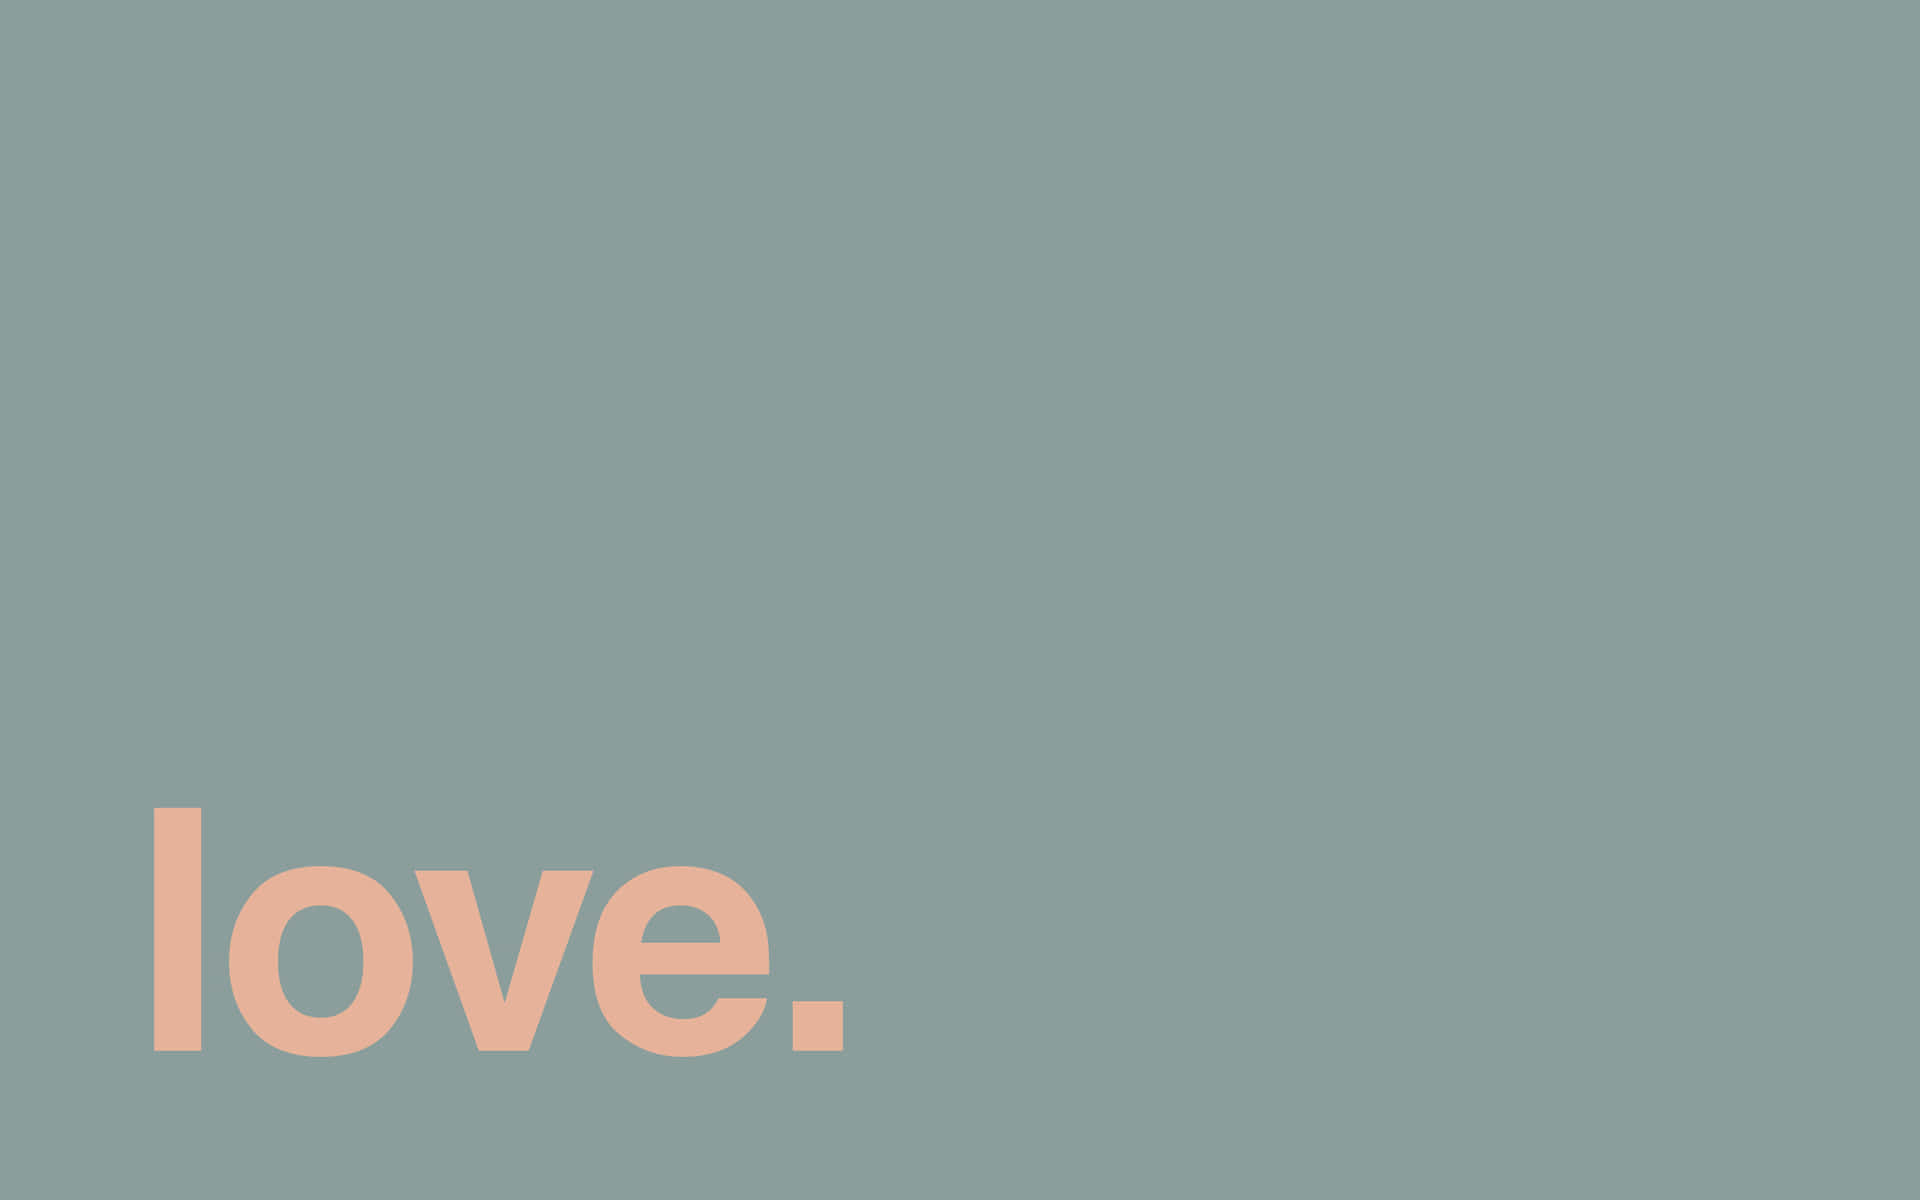 Love - A Pink And Grey Background With The Word Love Wallpaper